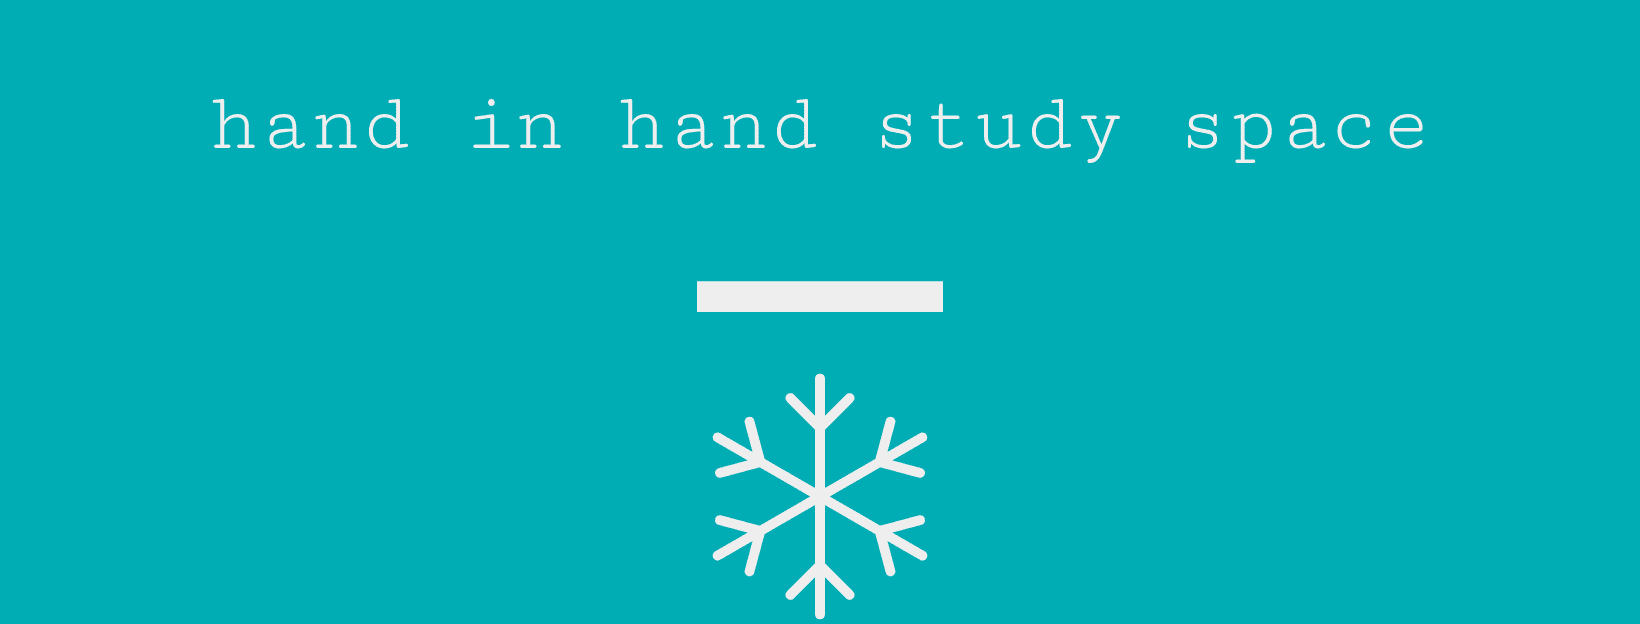 hand in hand study space